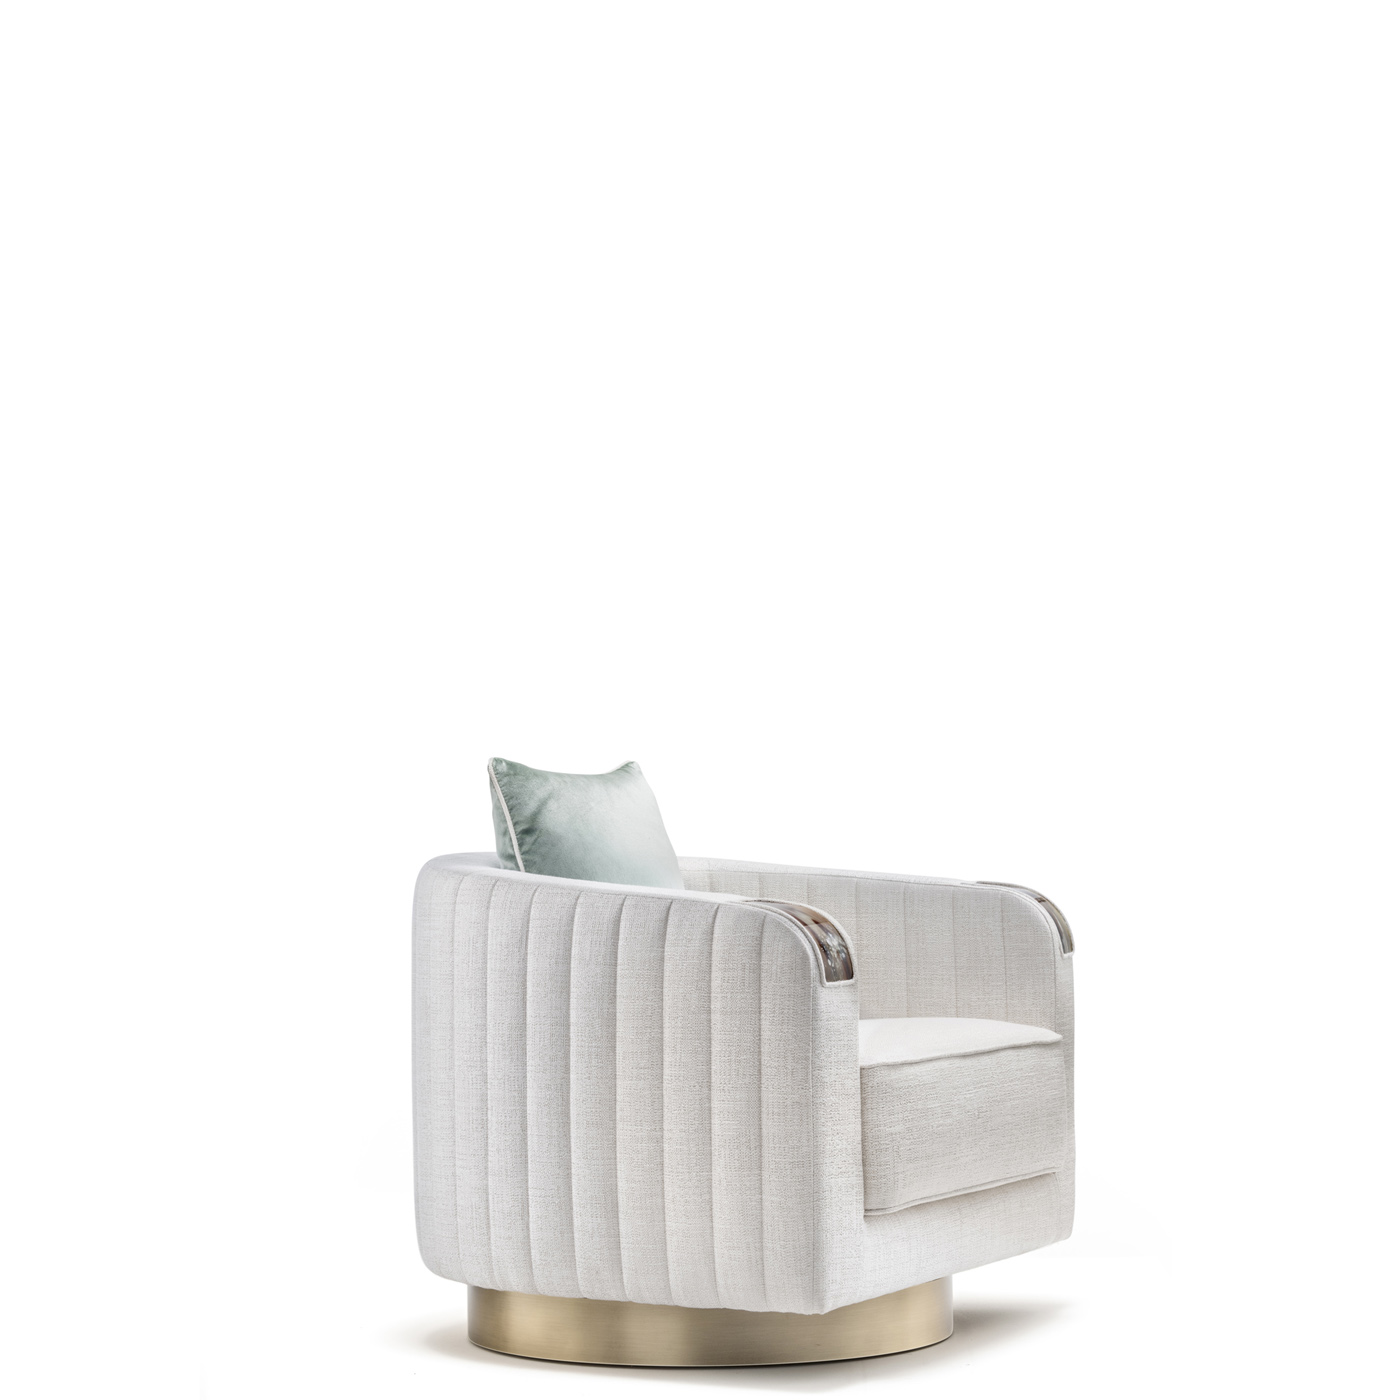 Sofas and seats - Rea armchair in Sparks fabric with horn armrests 7024B - Arcahorn